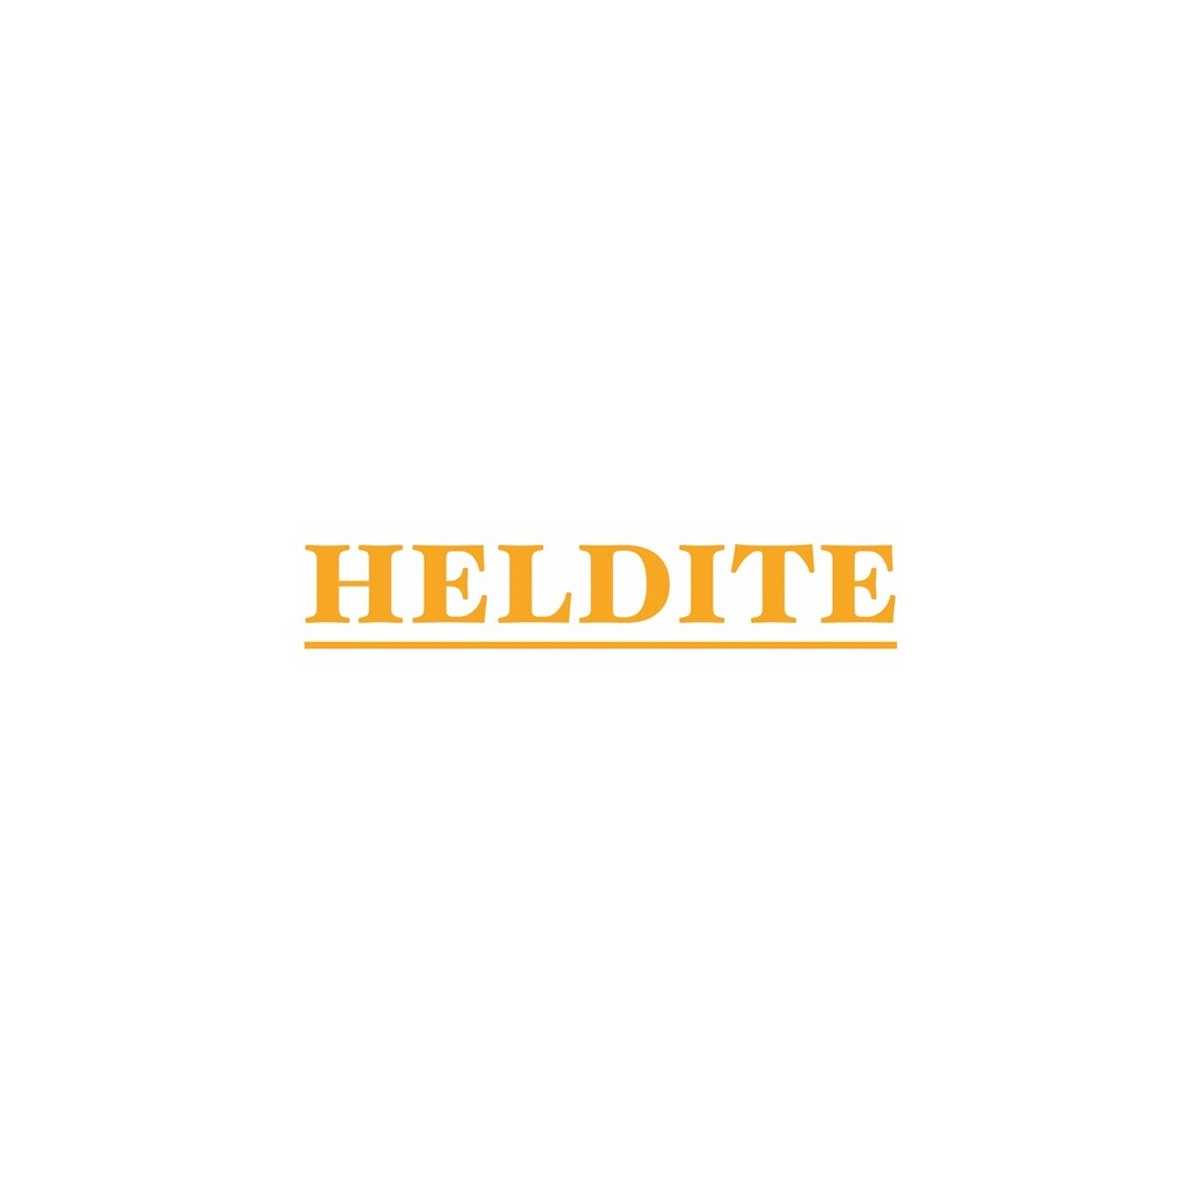 Where to Buy Heldite Products